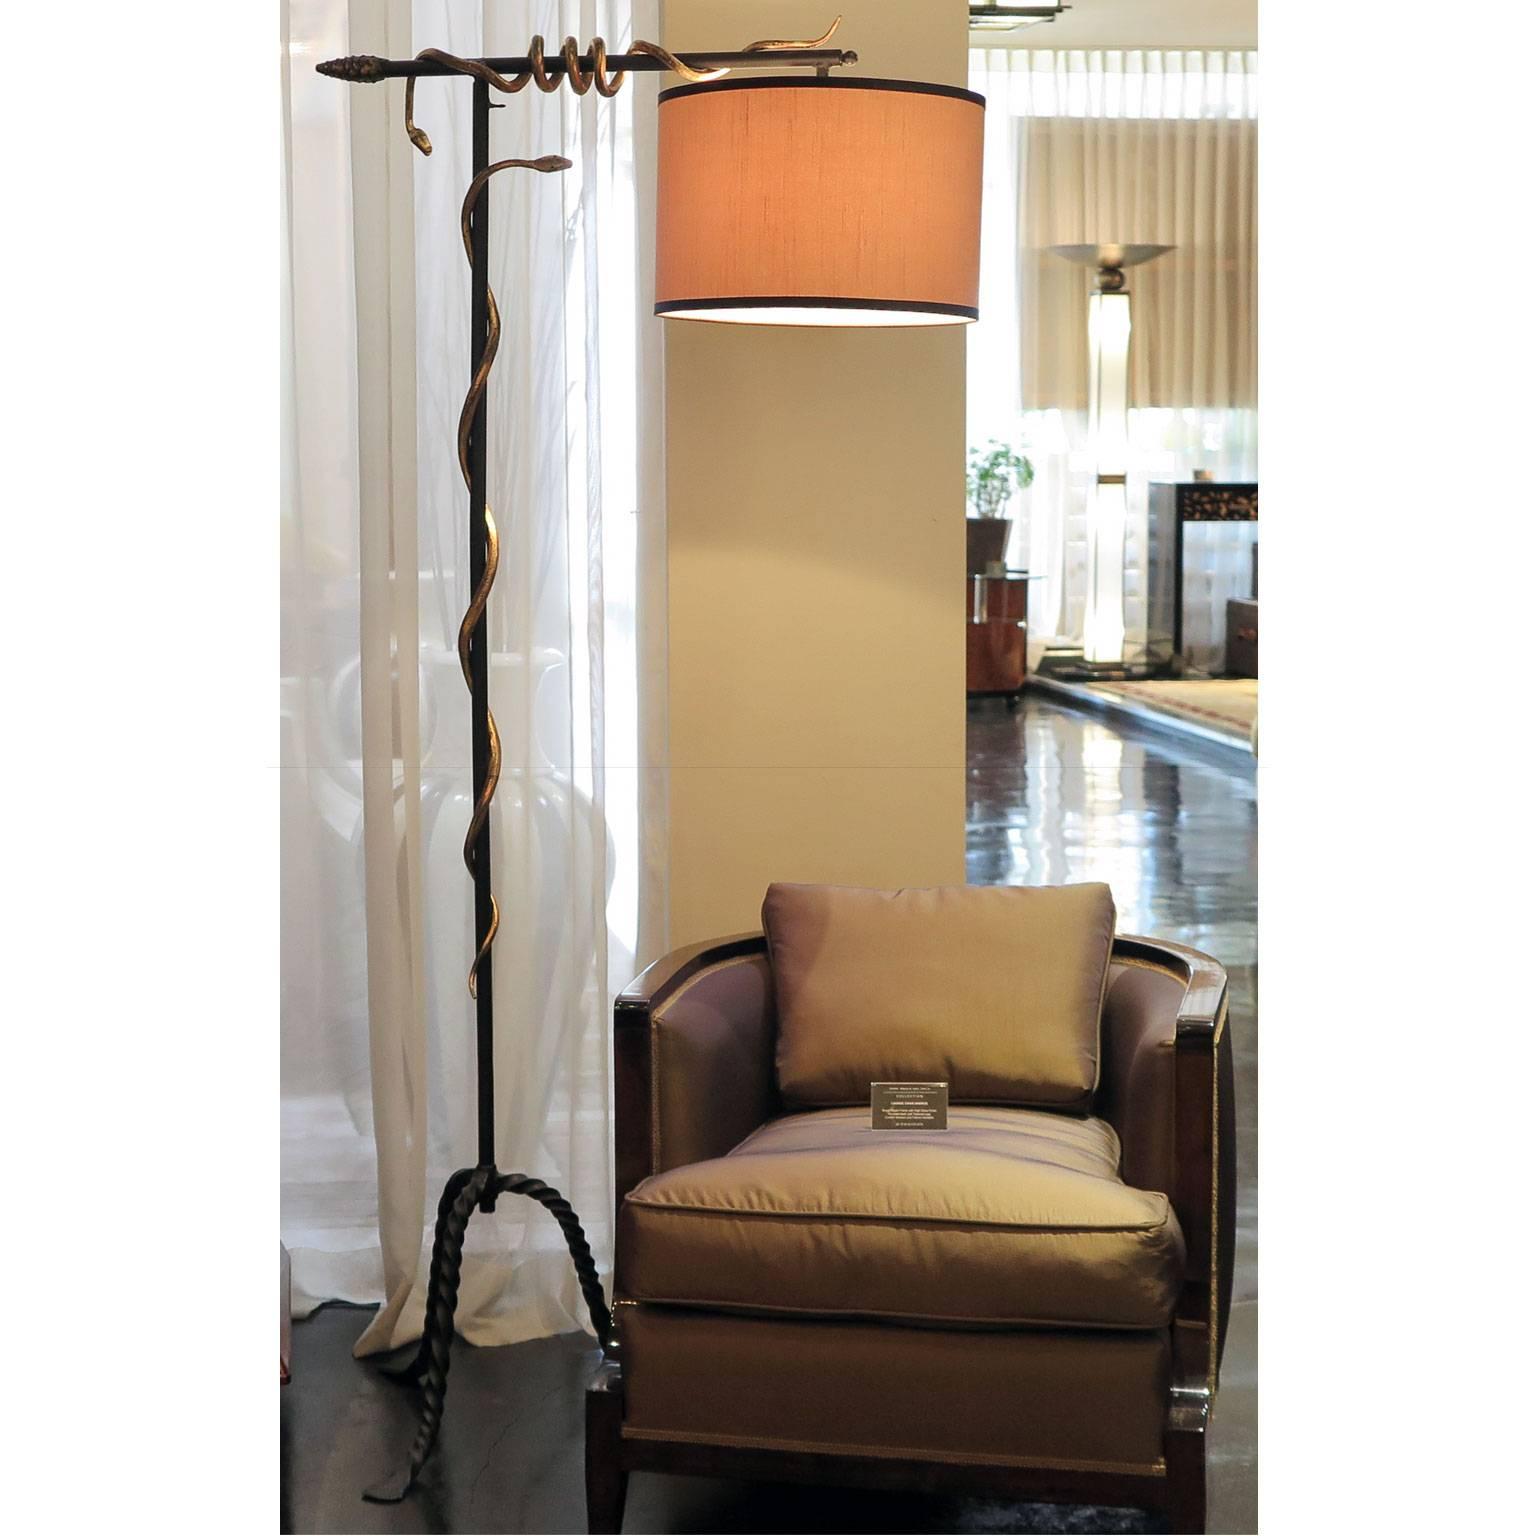 Unusual floor lamp with a black metal stem and three twisted black wrought iron legs. Two gilded snakes circle around the stems and a gilded apron detail decorates the end. A round silk shade hangs from the top stem. This gilded snake floor lamp has